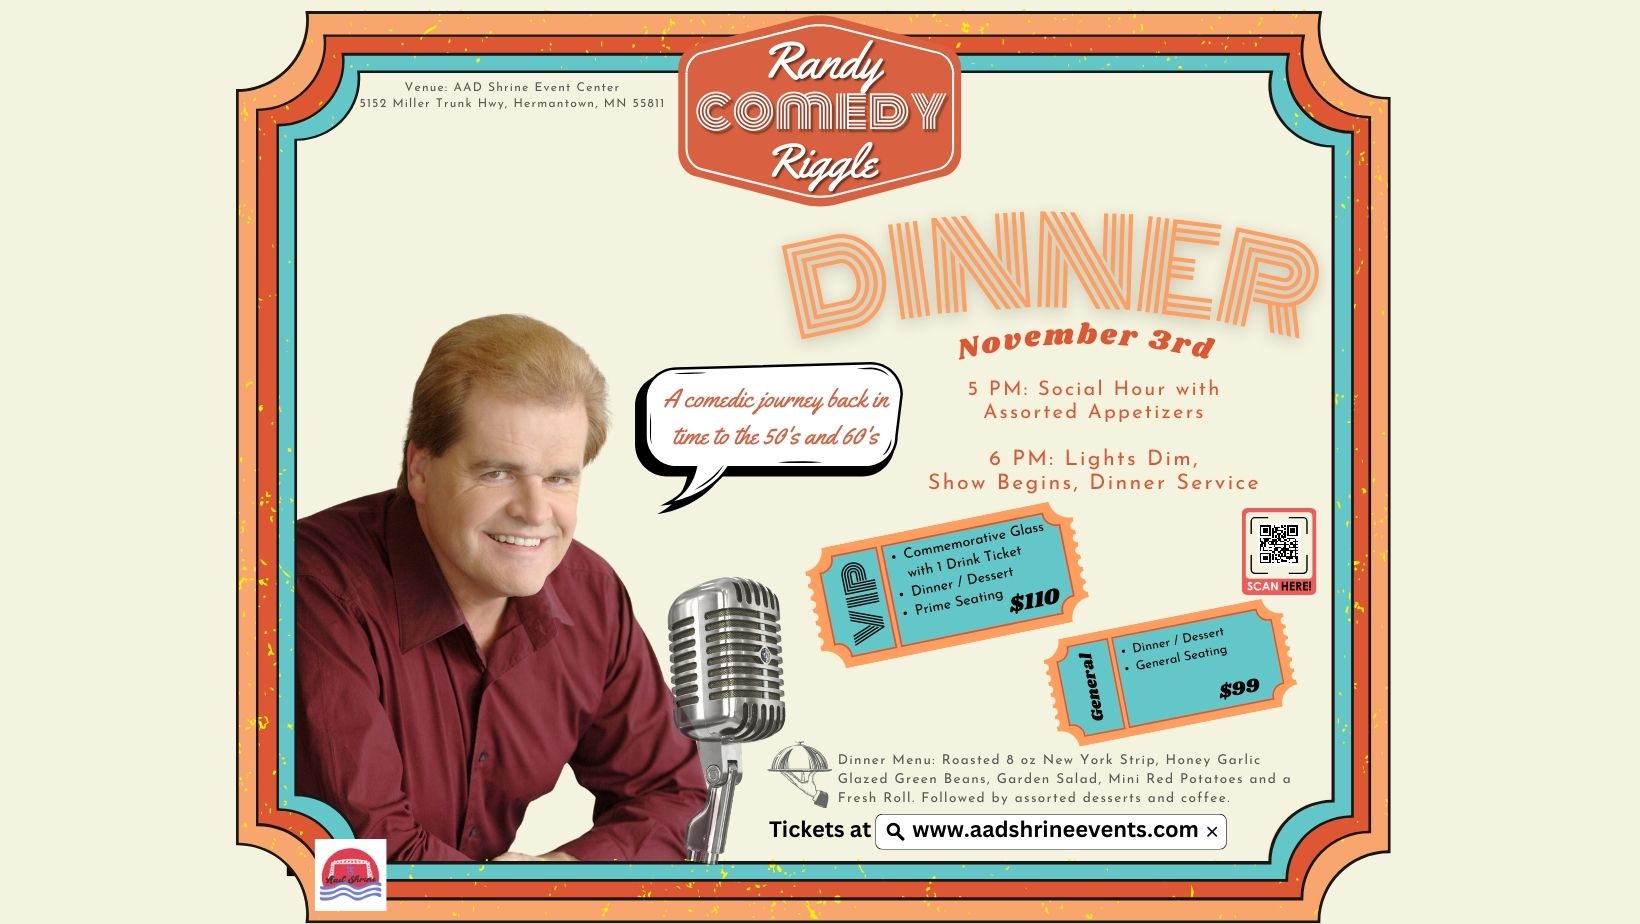 A poster for the AAD Shrine comedy dinner